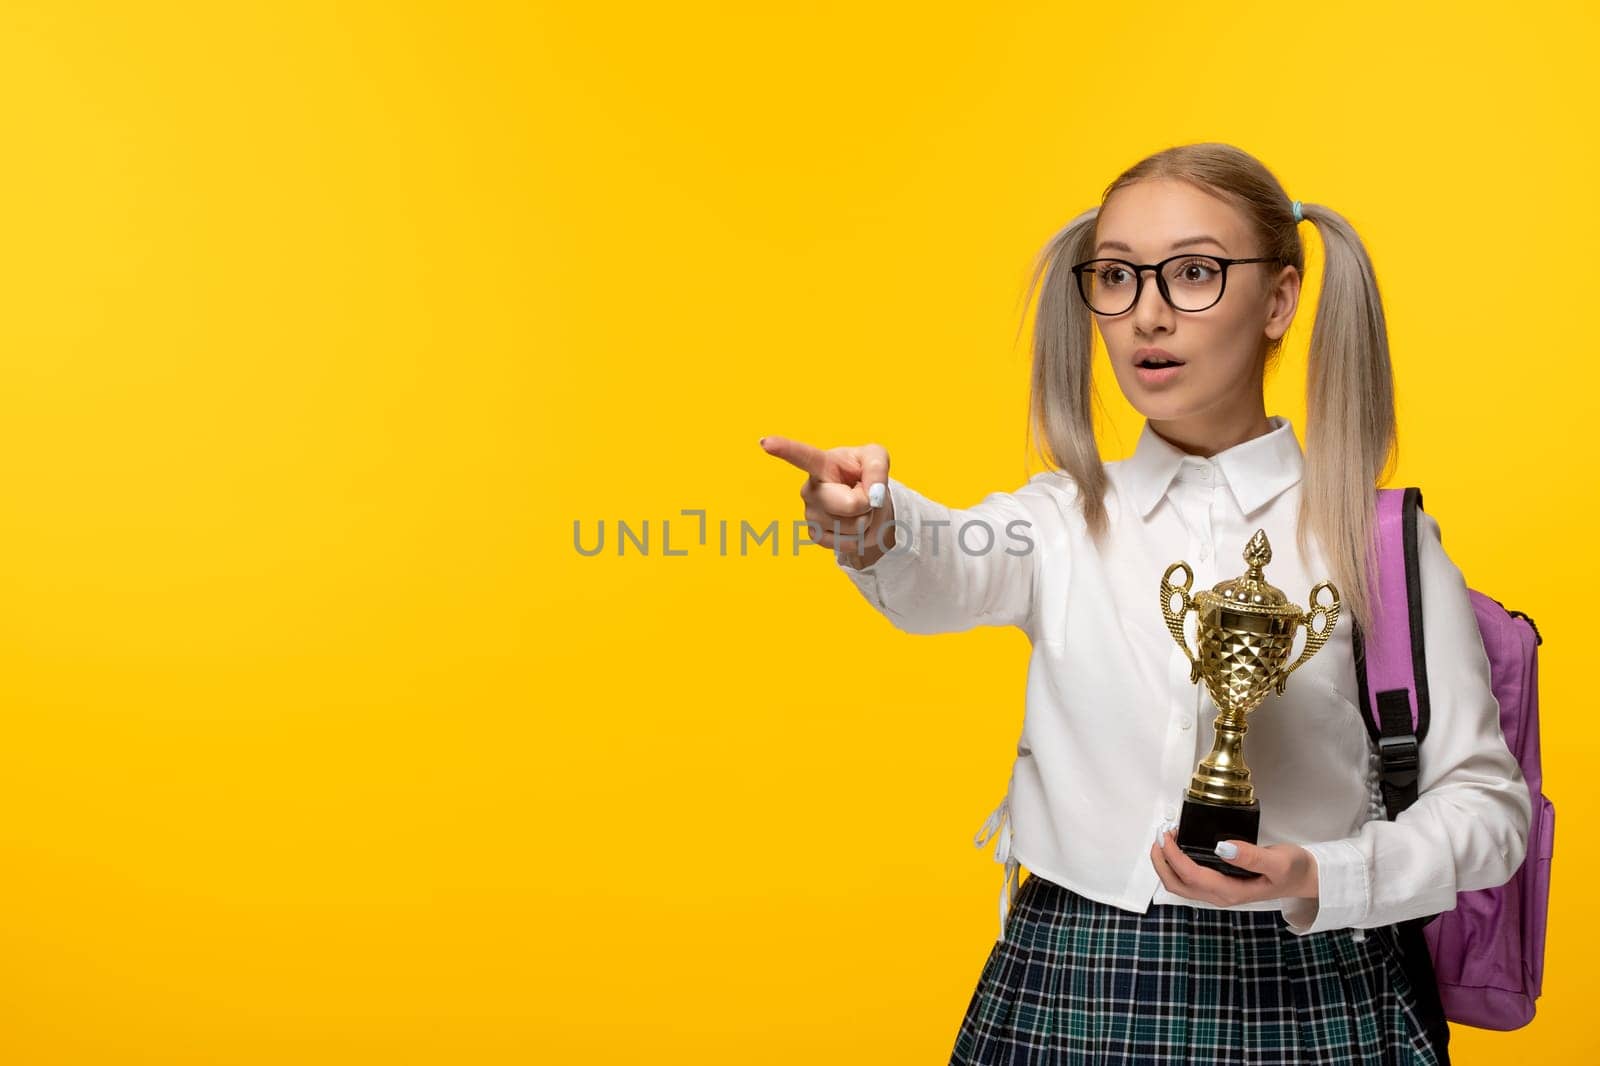 world book day blonde cute schoolgirl in uniform pointing left and holding a trophy by Kamran